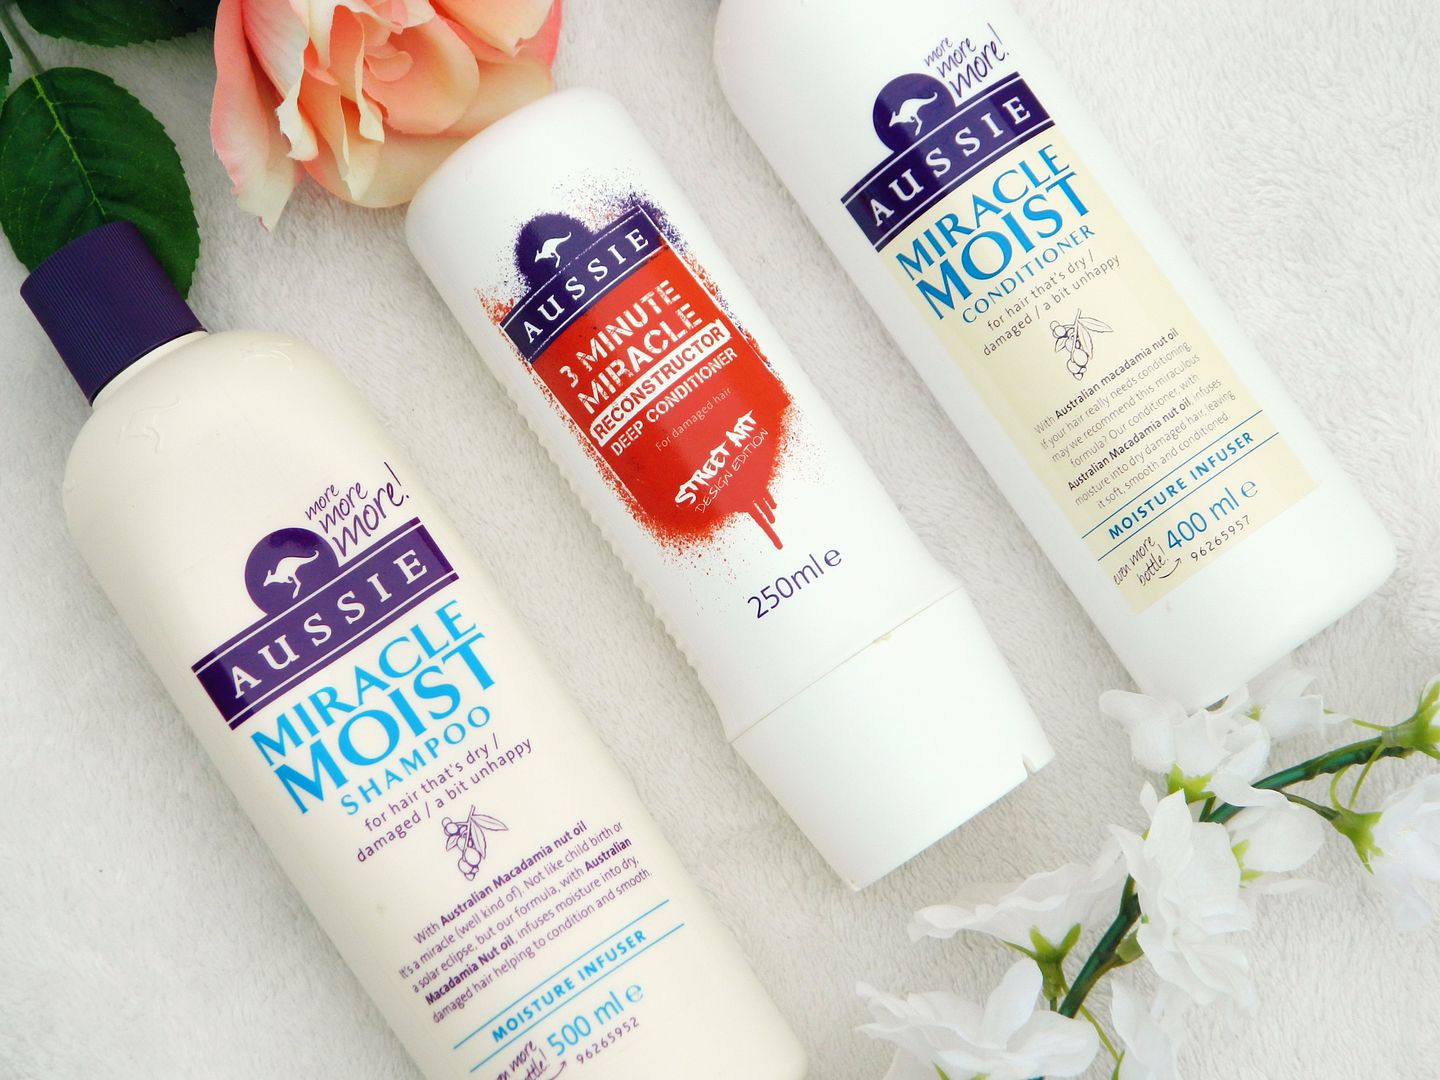 My Hair Saviours Aussie Miracle Moist Shampoo Conditioner 3 Minute Miracle Reconstruction Deep Conditioner Review Belle-amie UK Beauty Fashion Lifestyle Blog